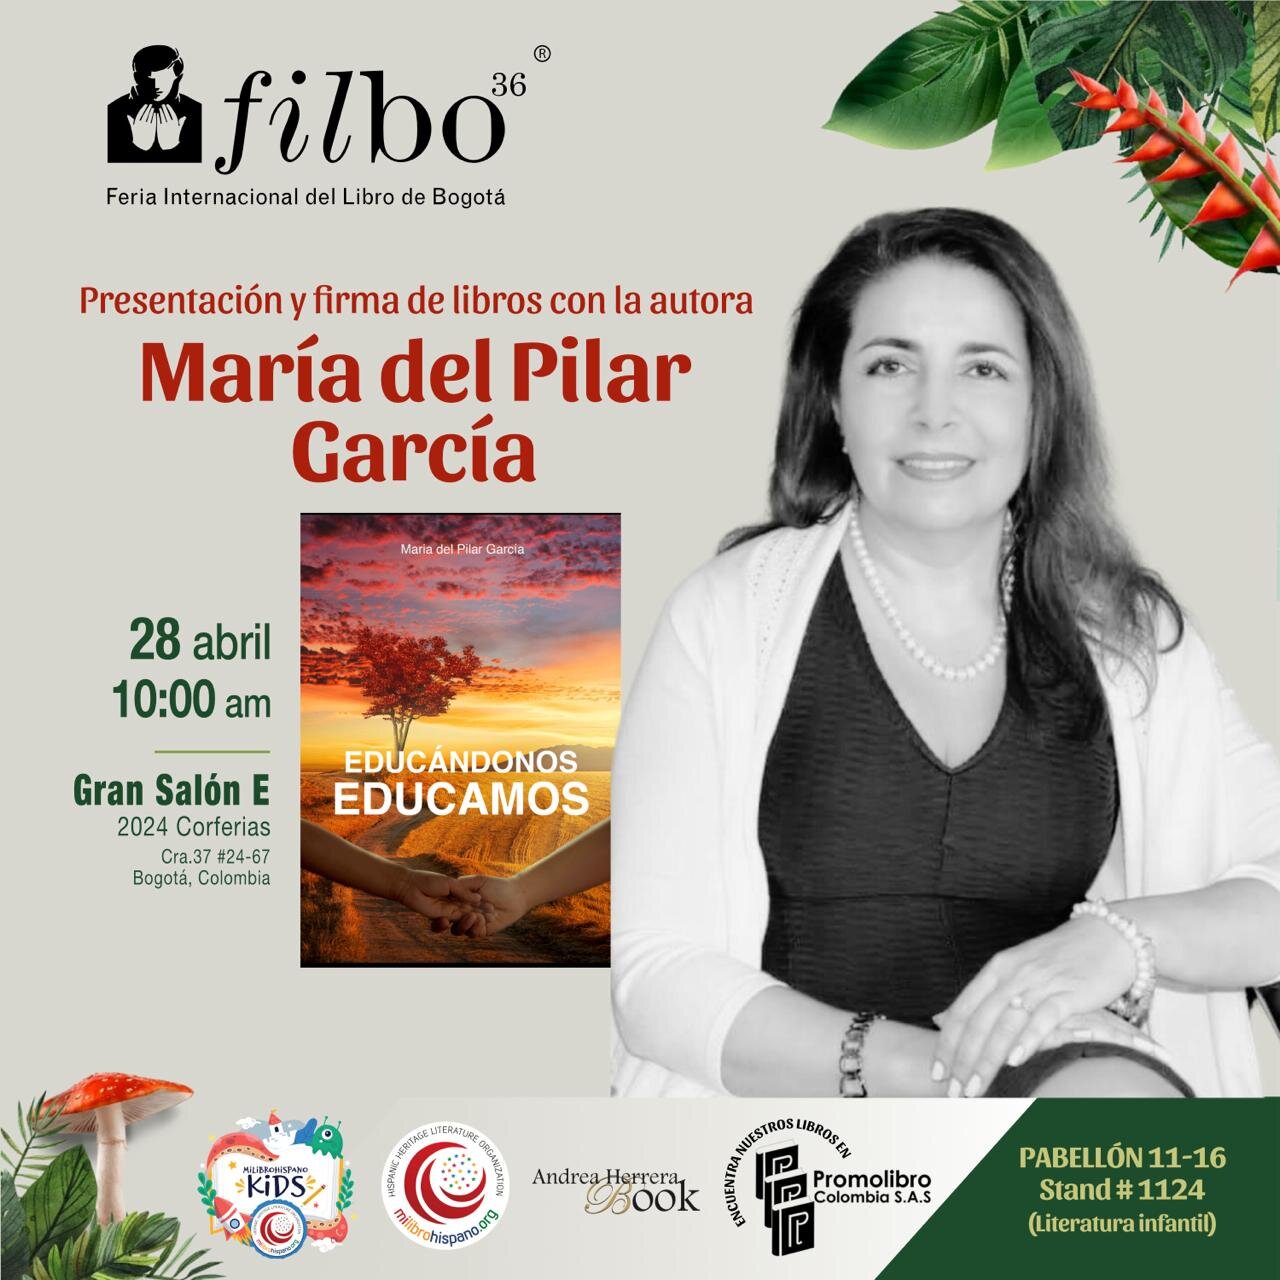 Continuing with her mission of making dreams come true and making knowledge the basis of education, our co-founder Mar&iacute;a Garc&iacute;a, will present at the Bogot&aacute; International Book Fair (FilBo), her book &quot;Educ&aacute;ndonos educam